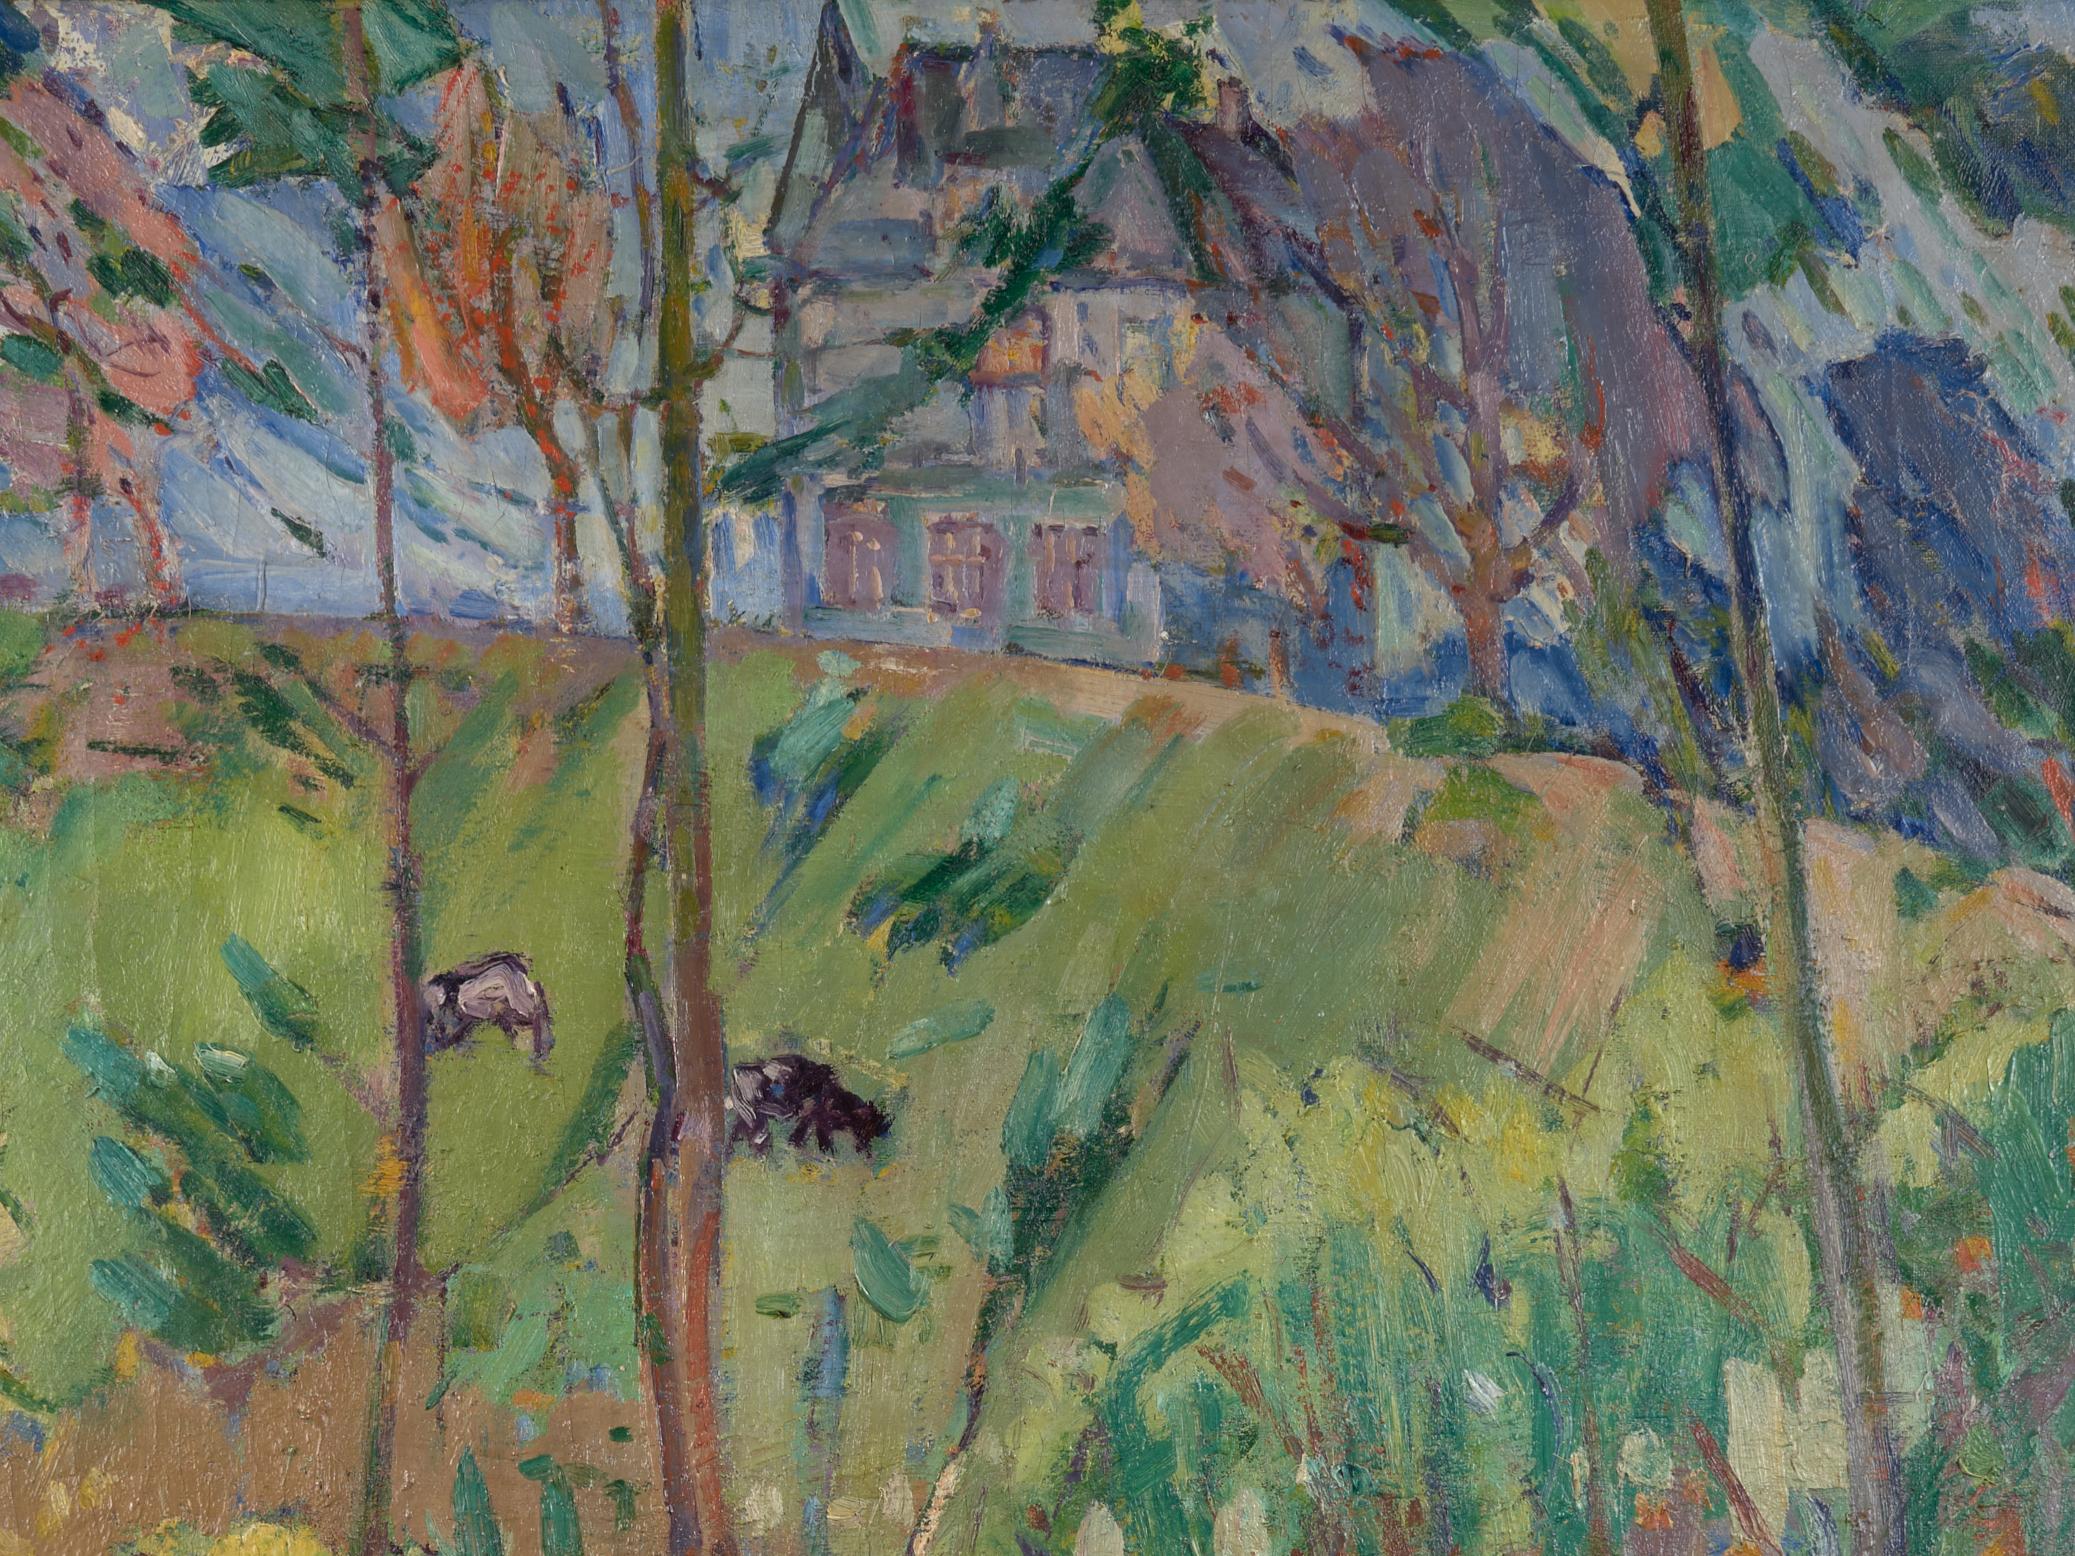 A very nice fauvist painting of a country landscape in muted colors by Robert Houpels a post-impressionist landscape and marine painter. After living in Uccle and Woluwe St Pierre, the artist settled in London in 1935.The painting is framed with a